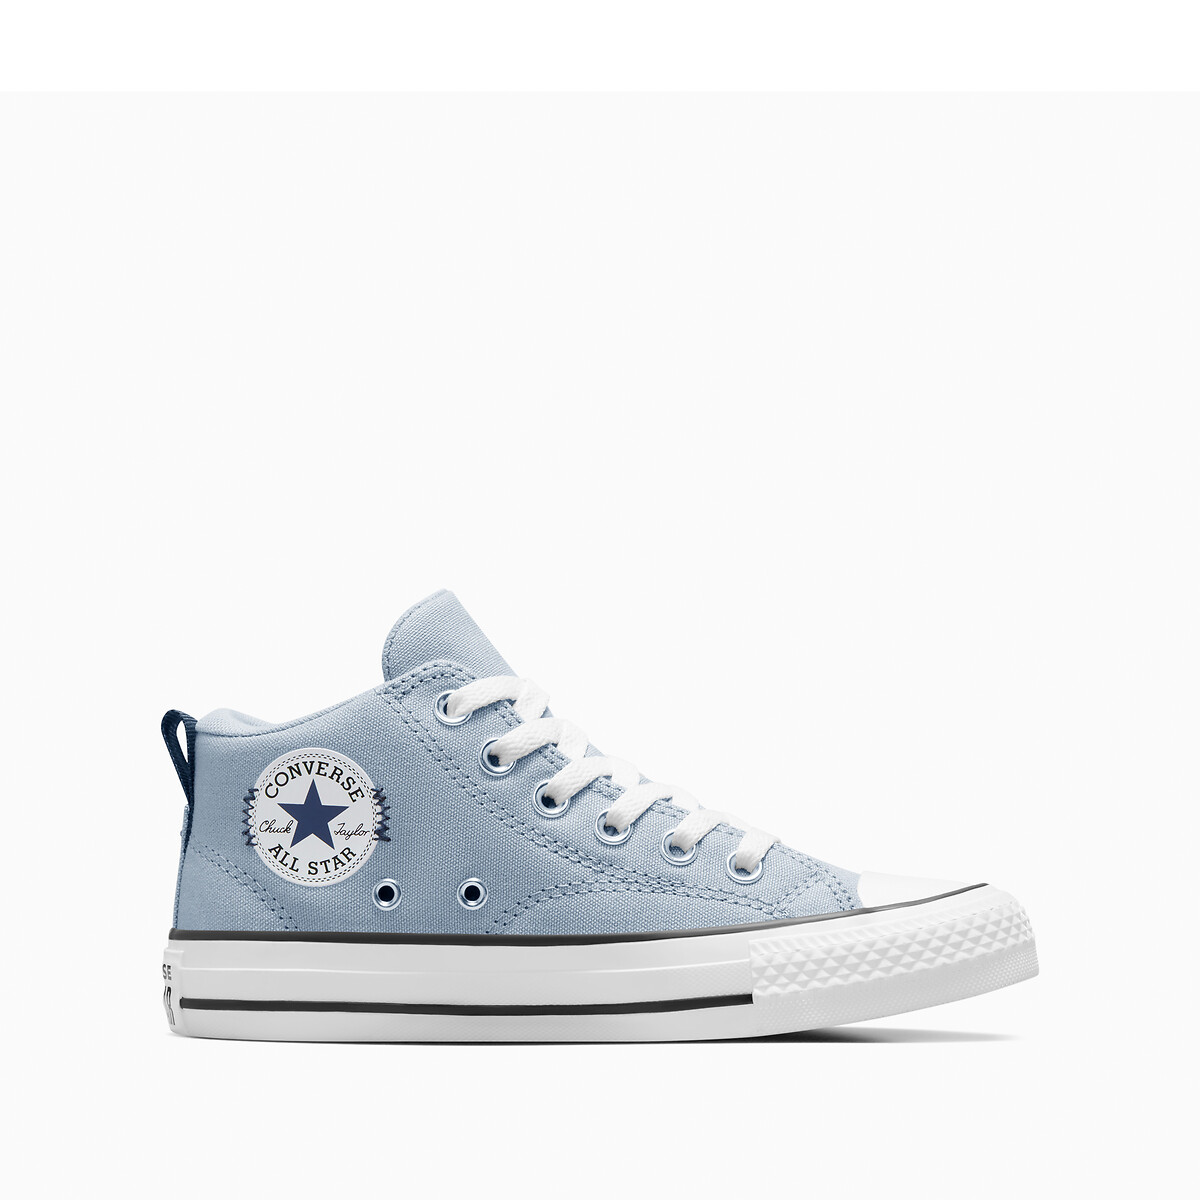 Converse Sneakers Malden Street Mid Day Trip Utility